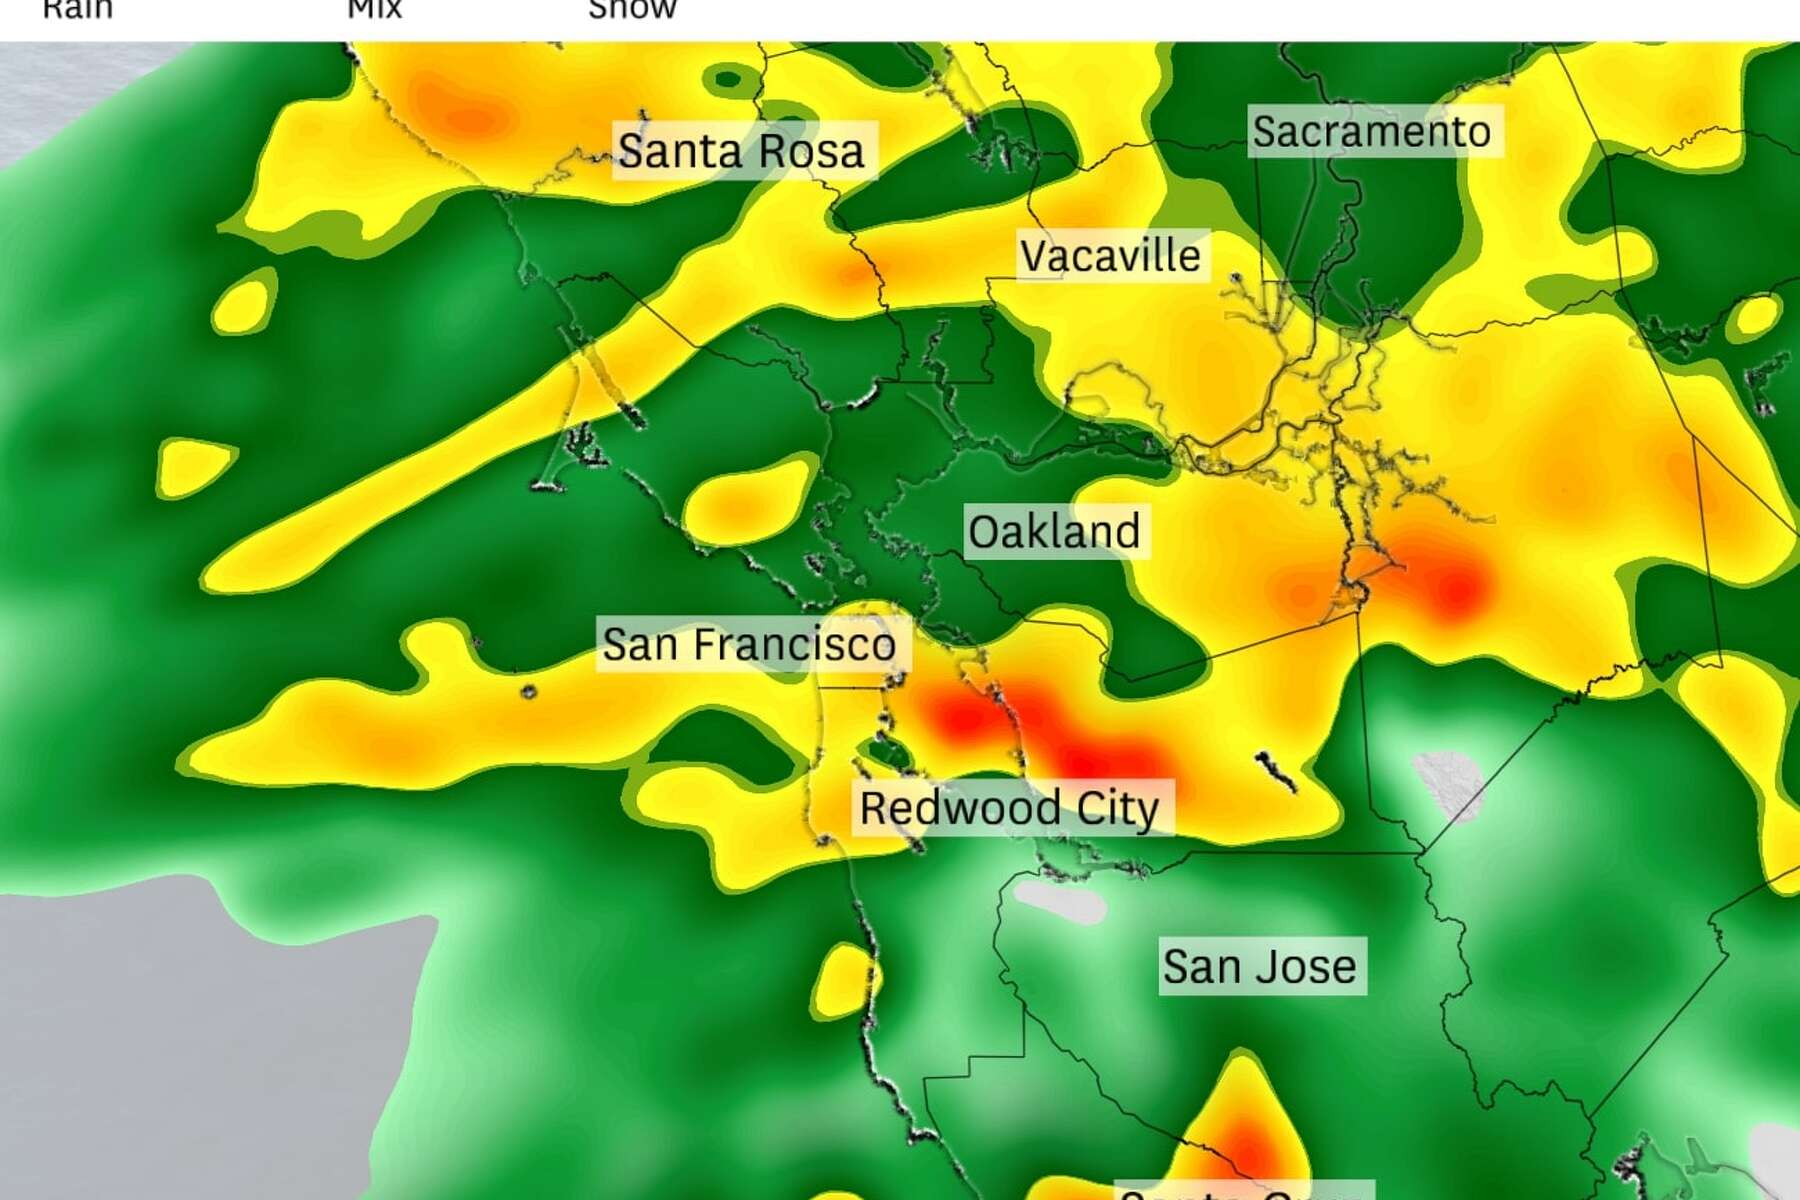 California storms: 'Obscene' rainfall possible in Big Sur